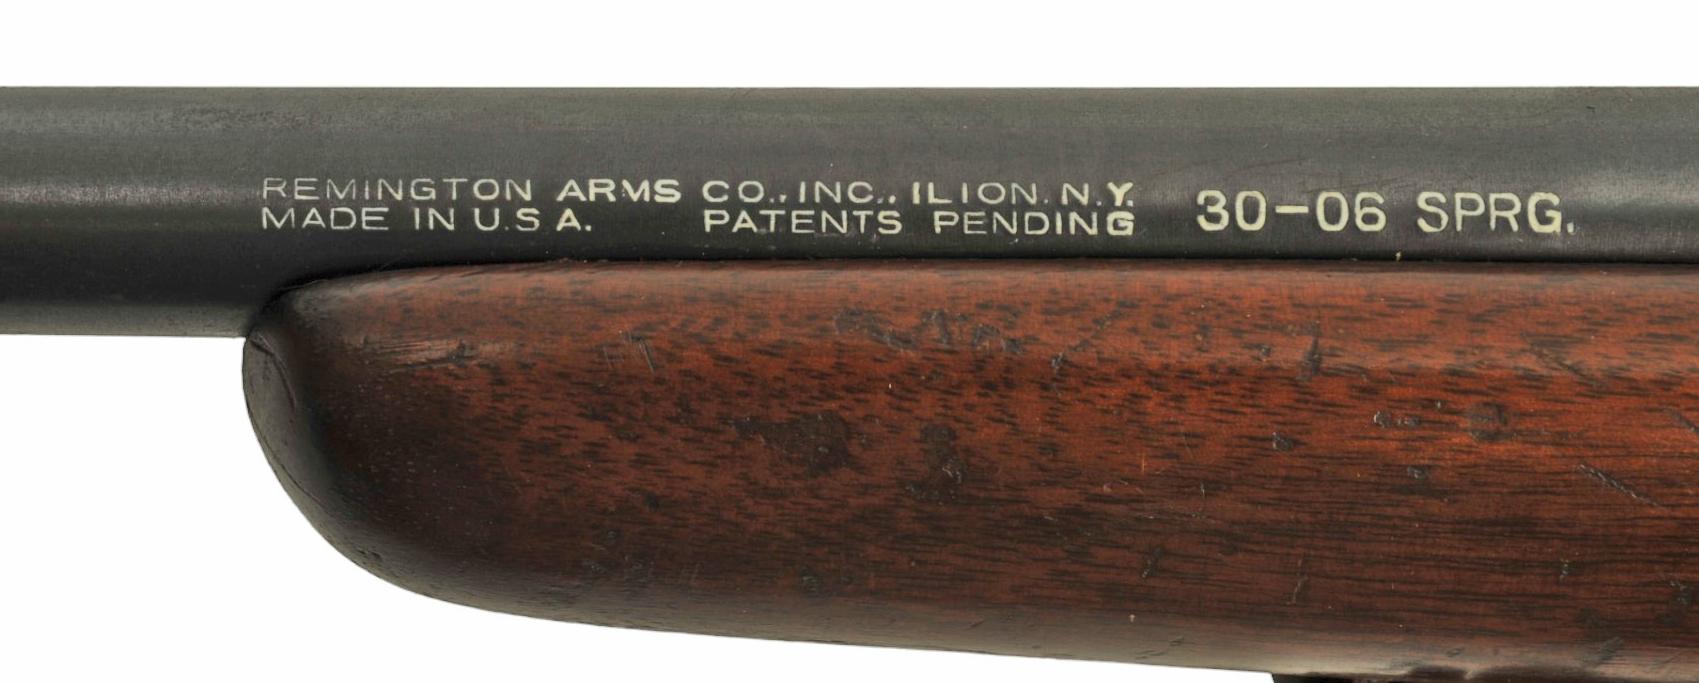 Remington Model 721 .30-06 Bolt Action Rifle FFL Required: 37814 (APL1)